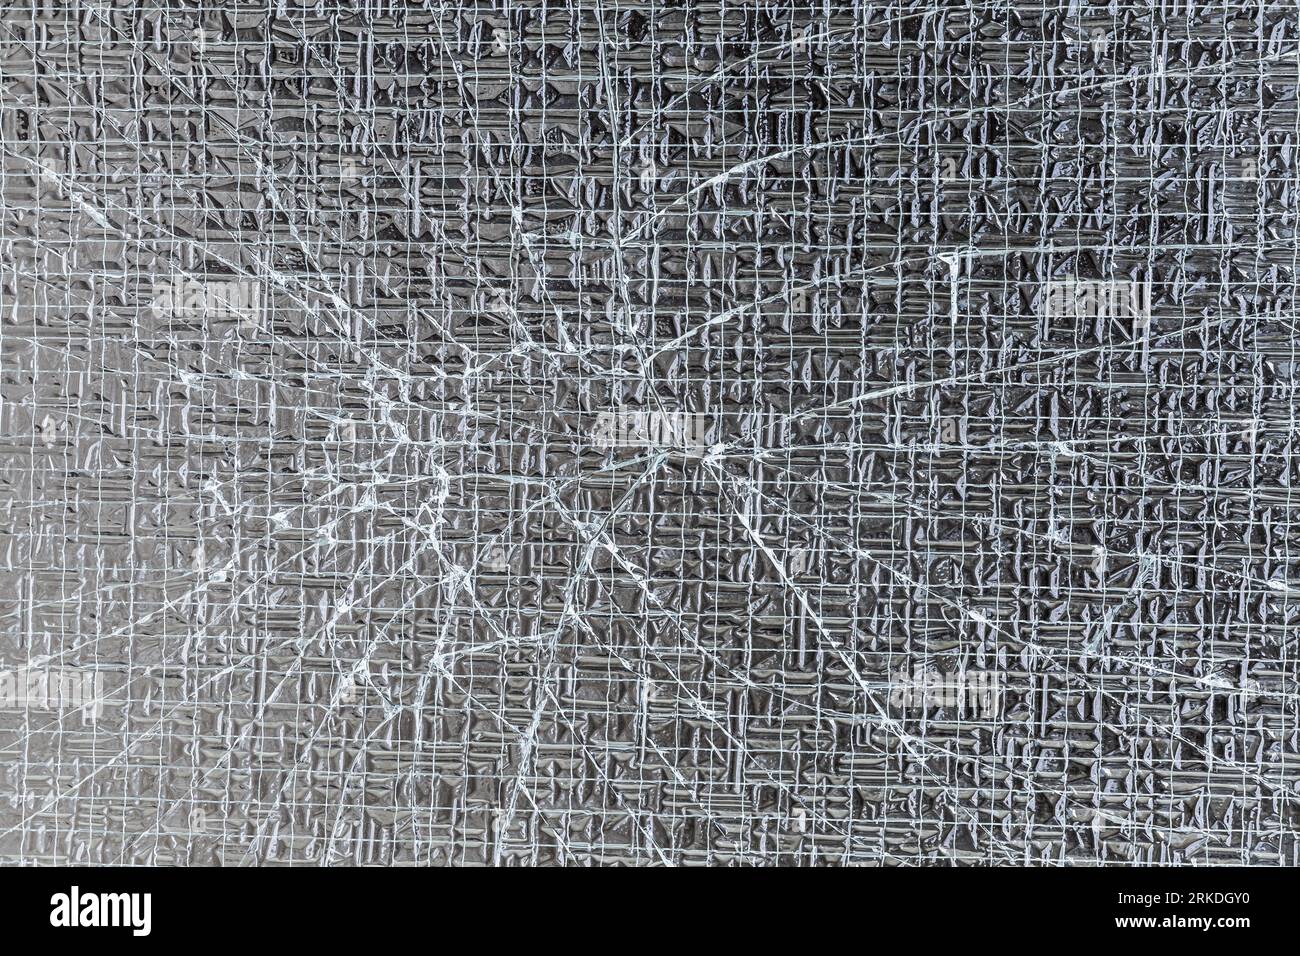 Broken laminated safety glass background and texture Stock Photo